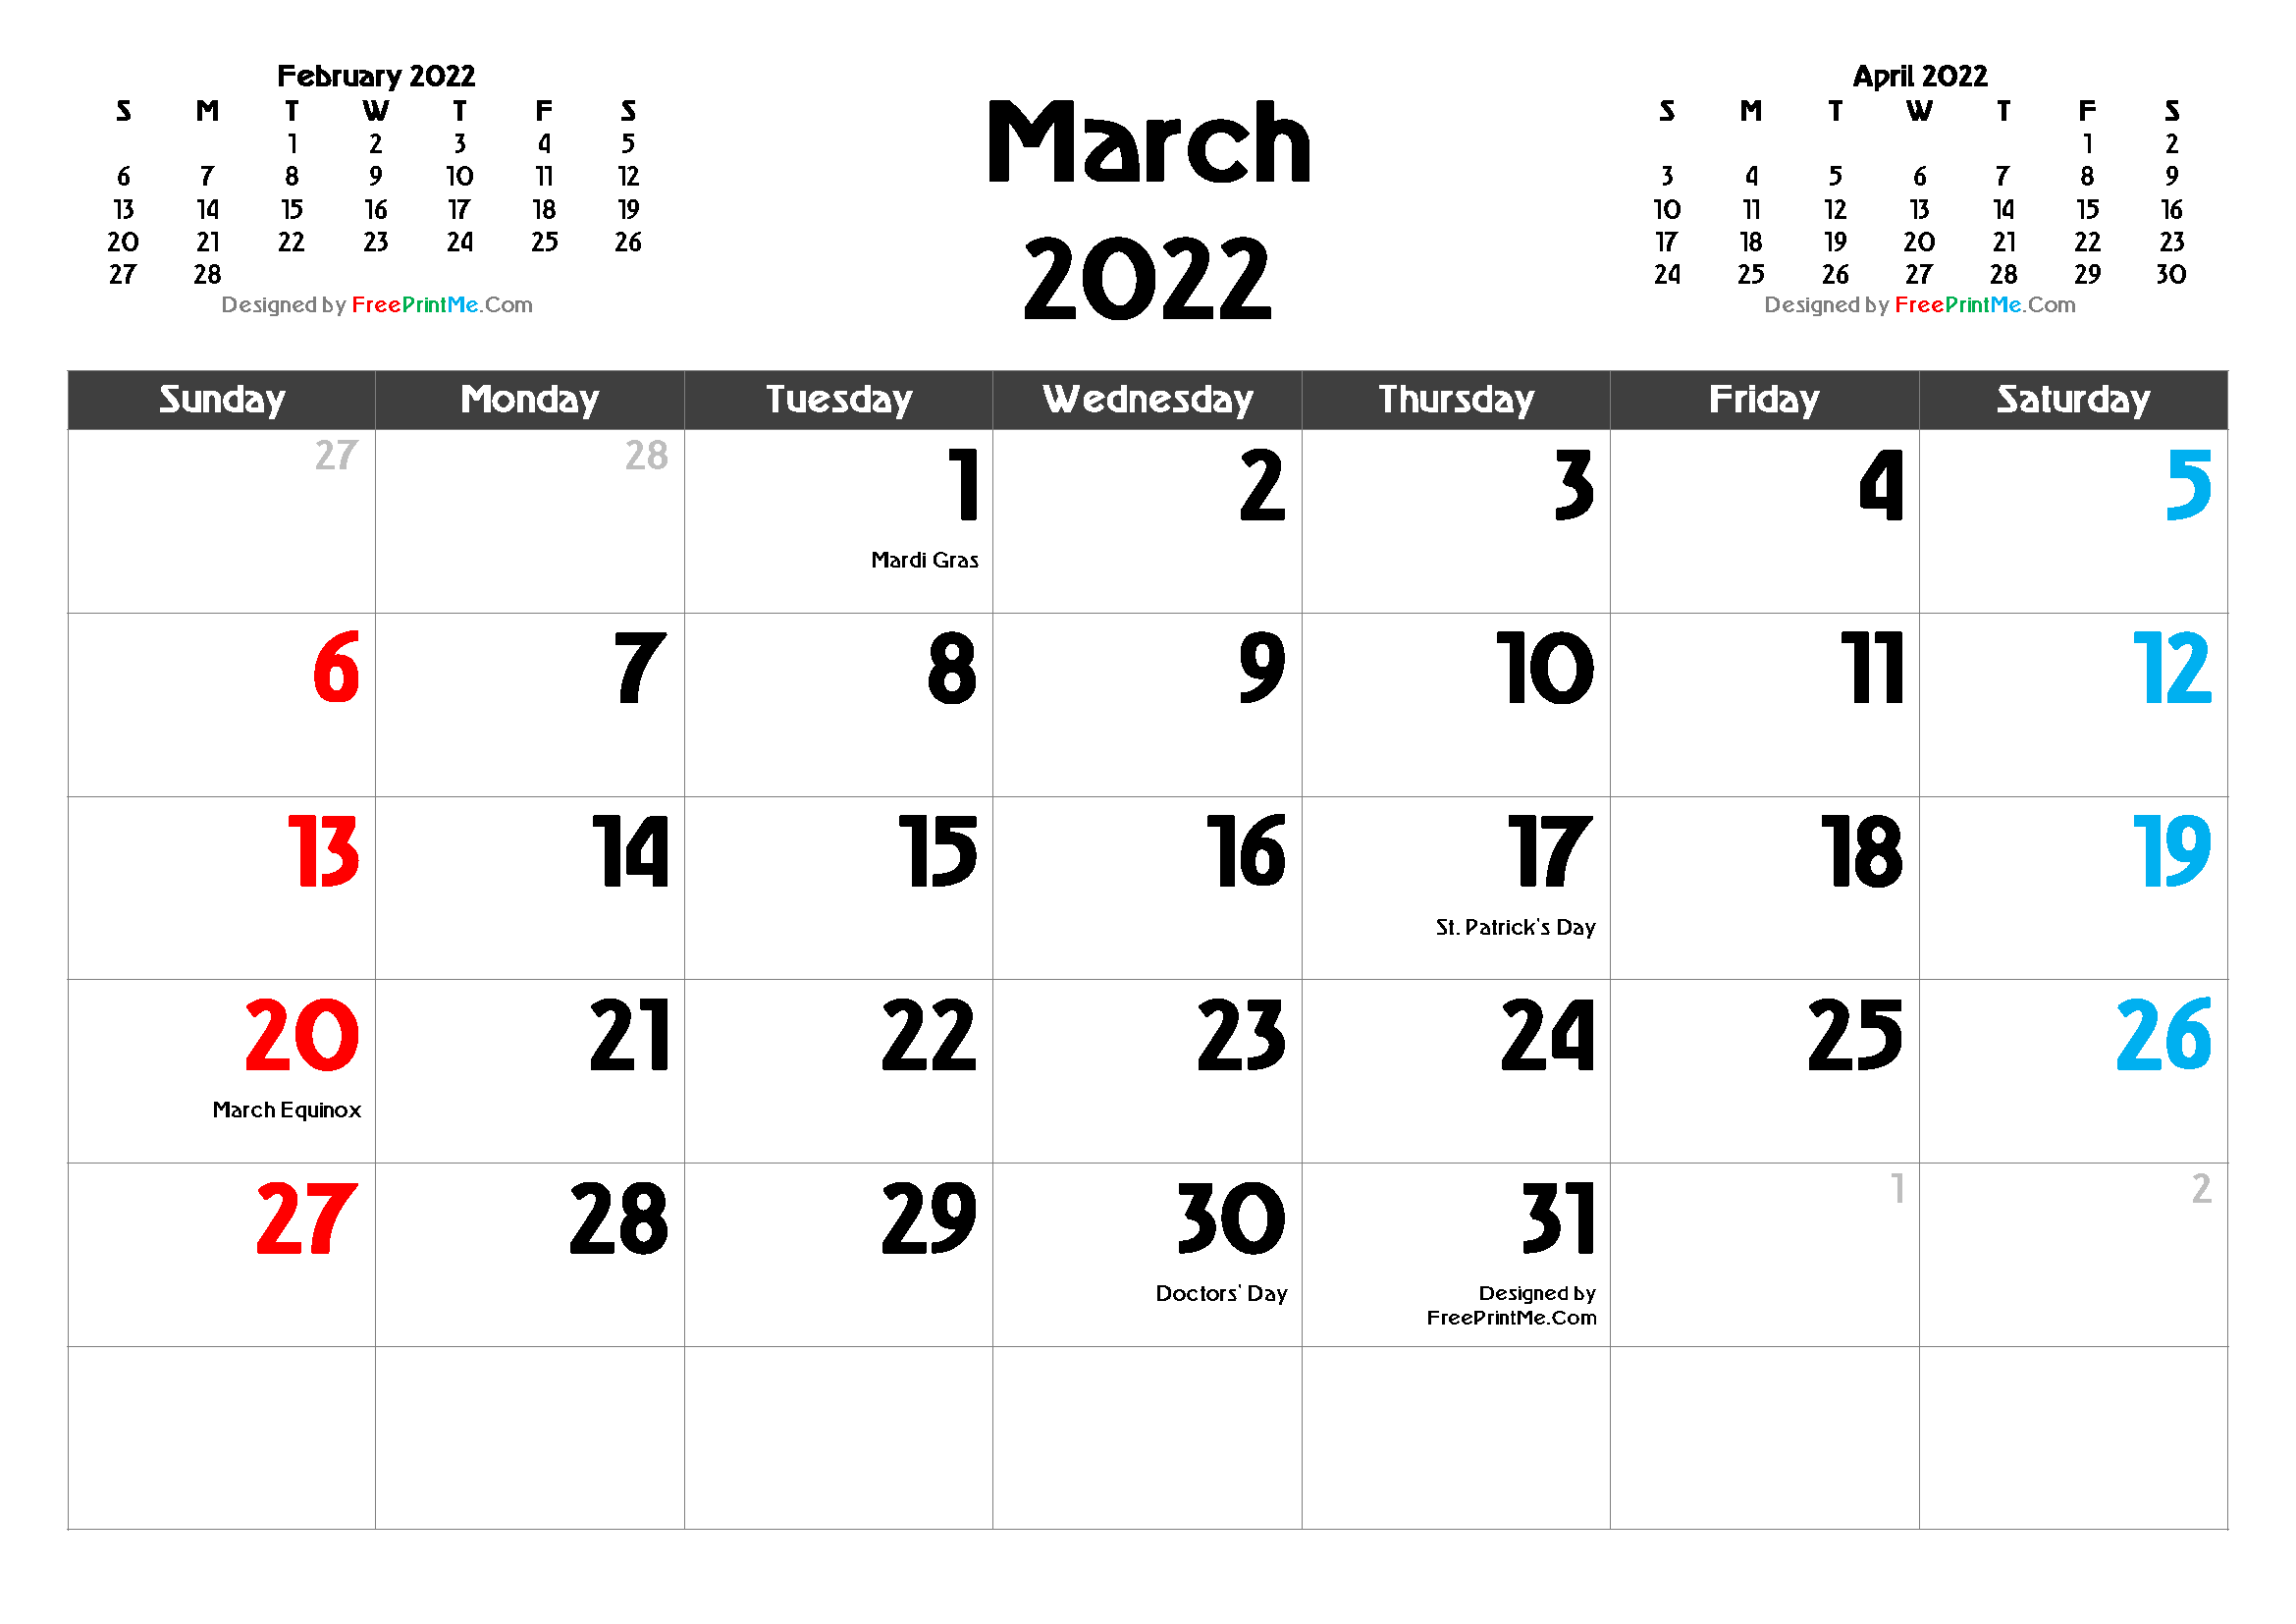 Free 2022 Calendar By Mail Free Printable March 2022 Calendar Pdf And Image